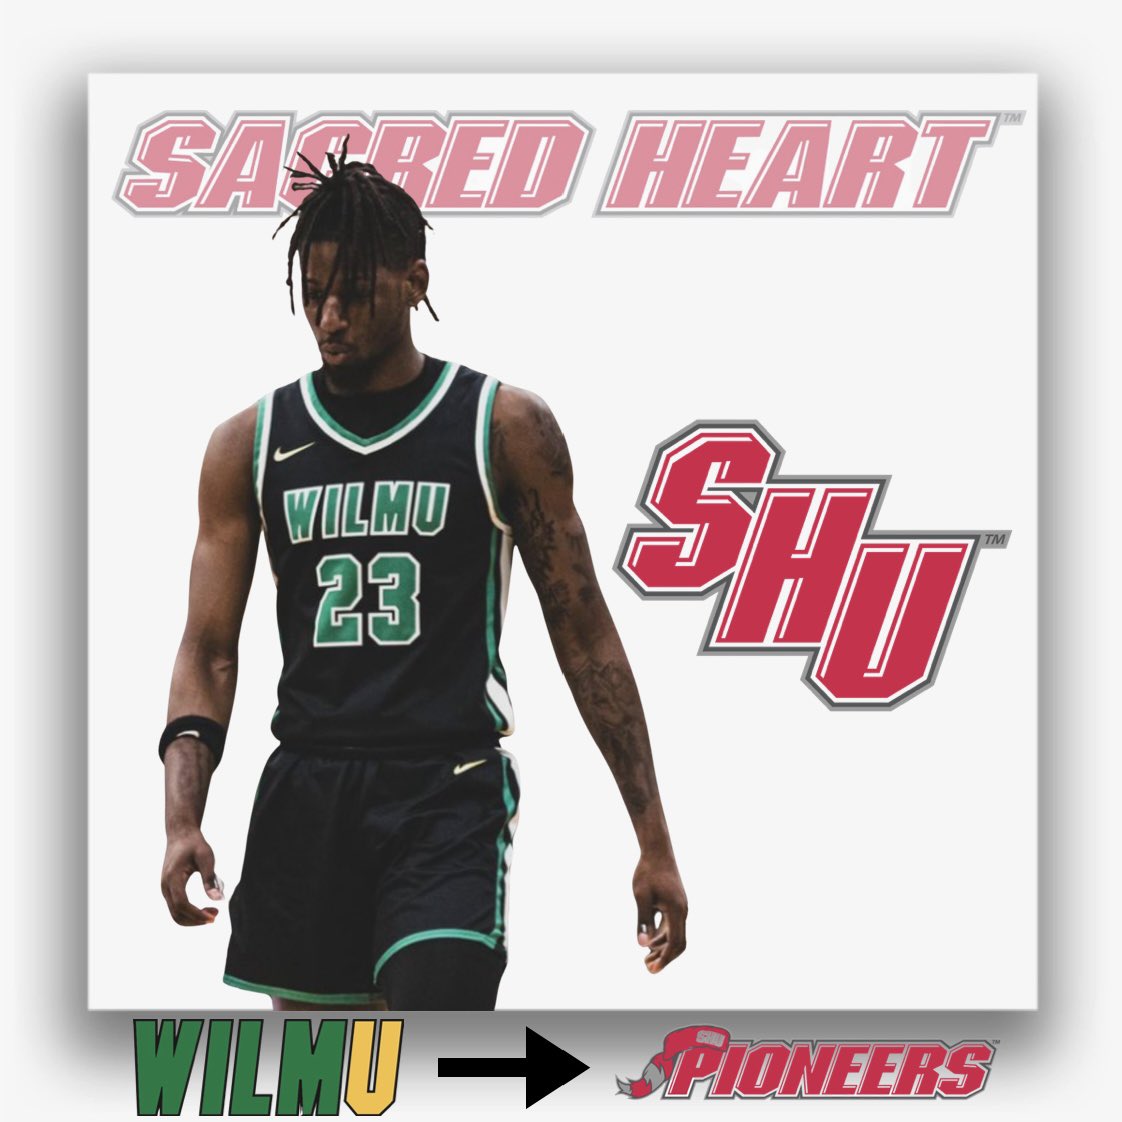 Earlier this month, Wilmington (D2) 6’4” SG Amiri Stewart (@sdot4ball) has committed to @SHU_MensHoops to spend his final year of college eligibility at the Division I level…

2023-24:
17.5 Pts / 4.4 Reb / 3.5 Ast / 1.8 Stl /
53.7% FG / 43.4% 3P